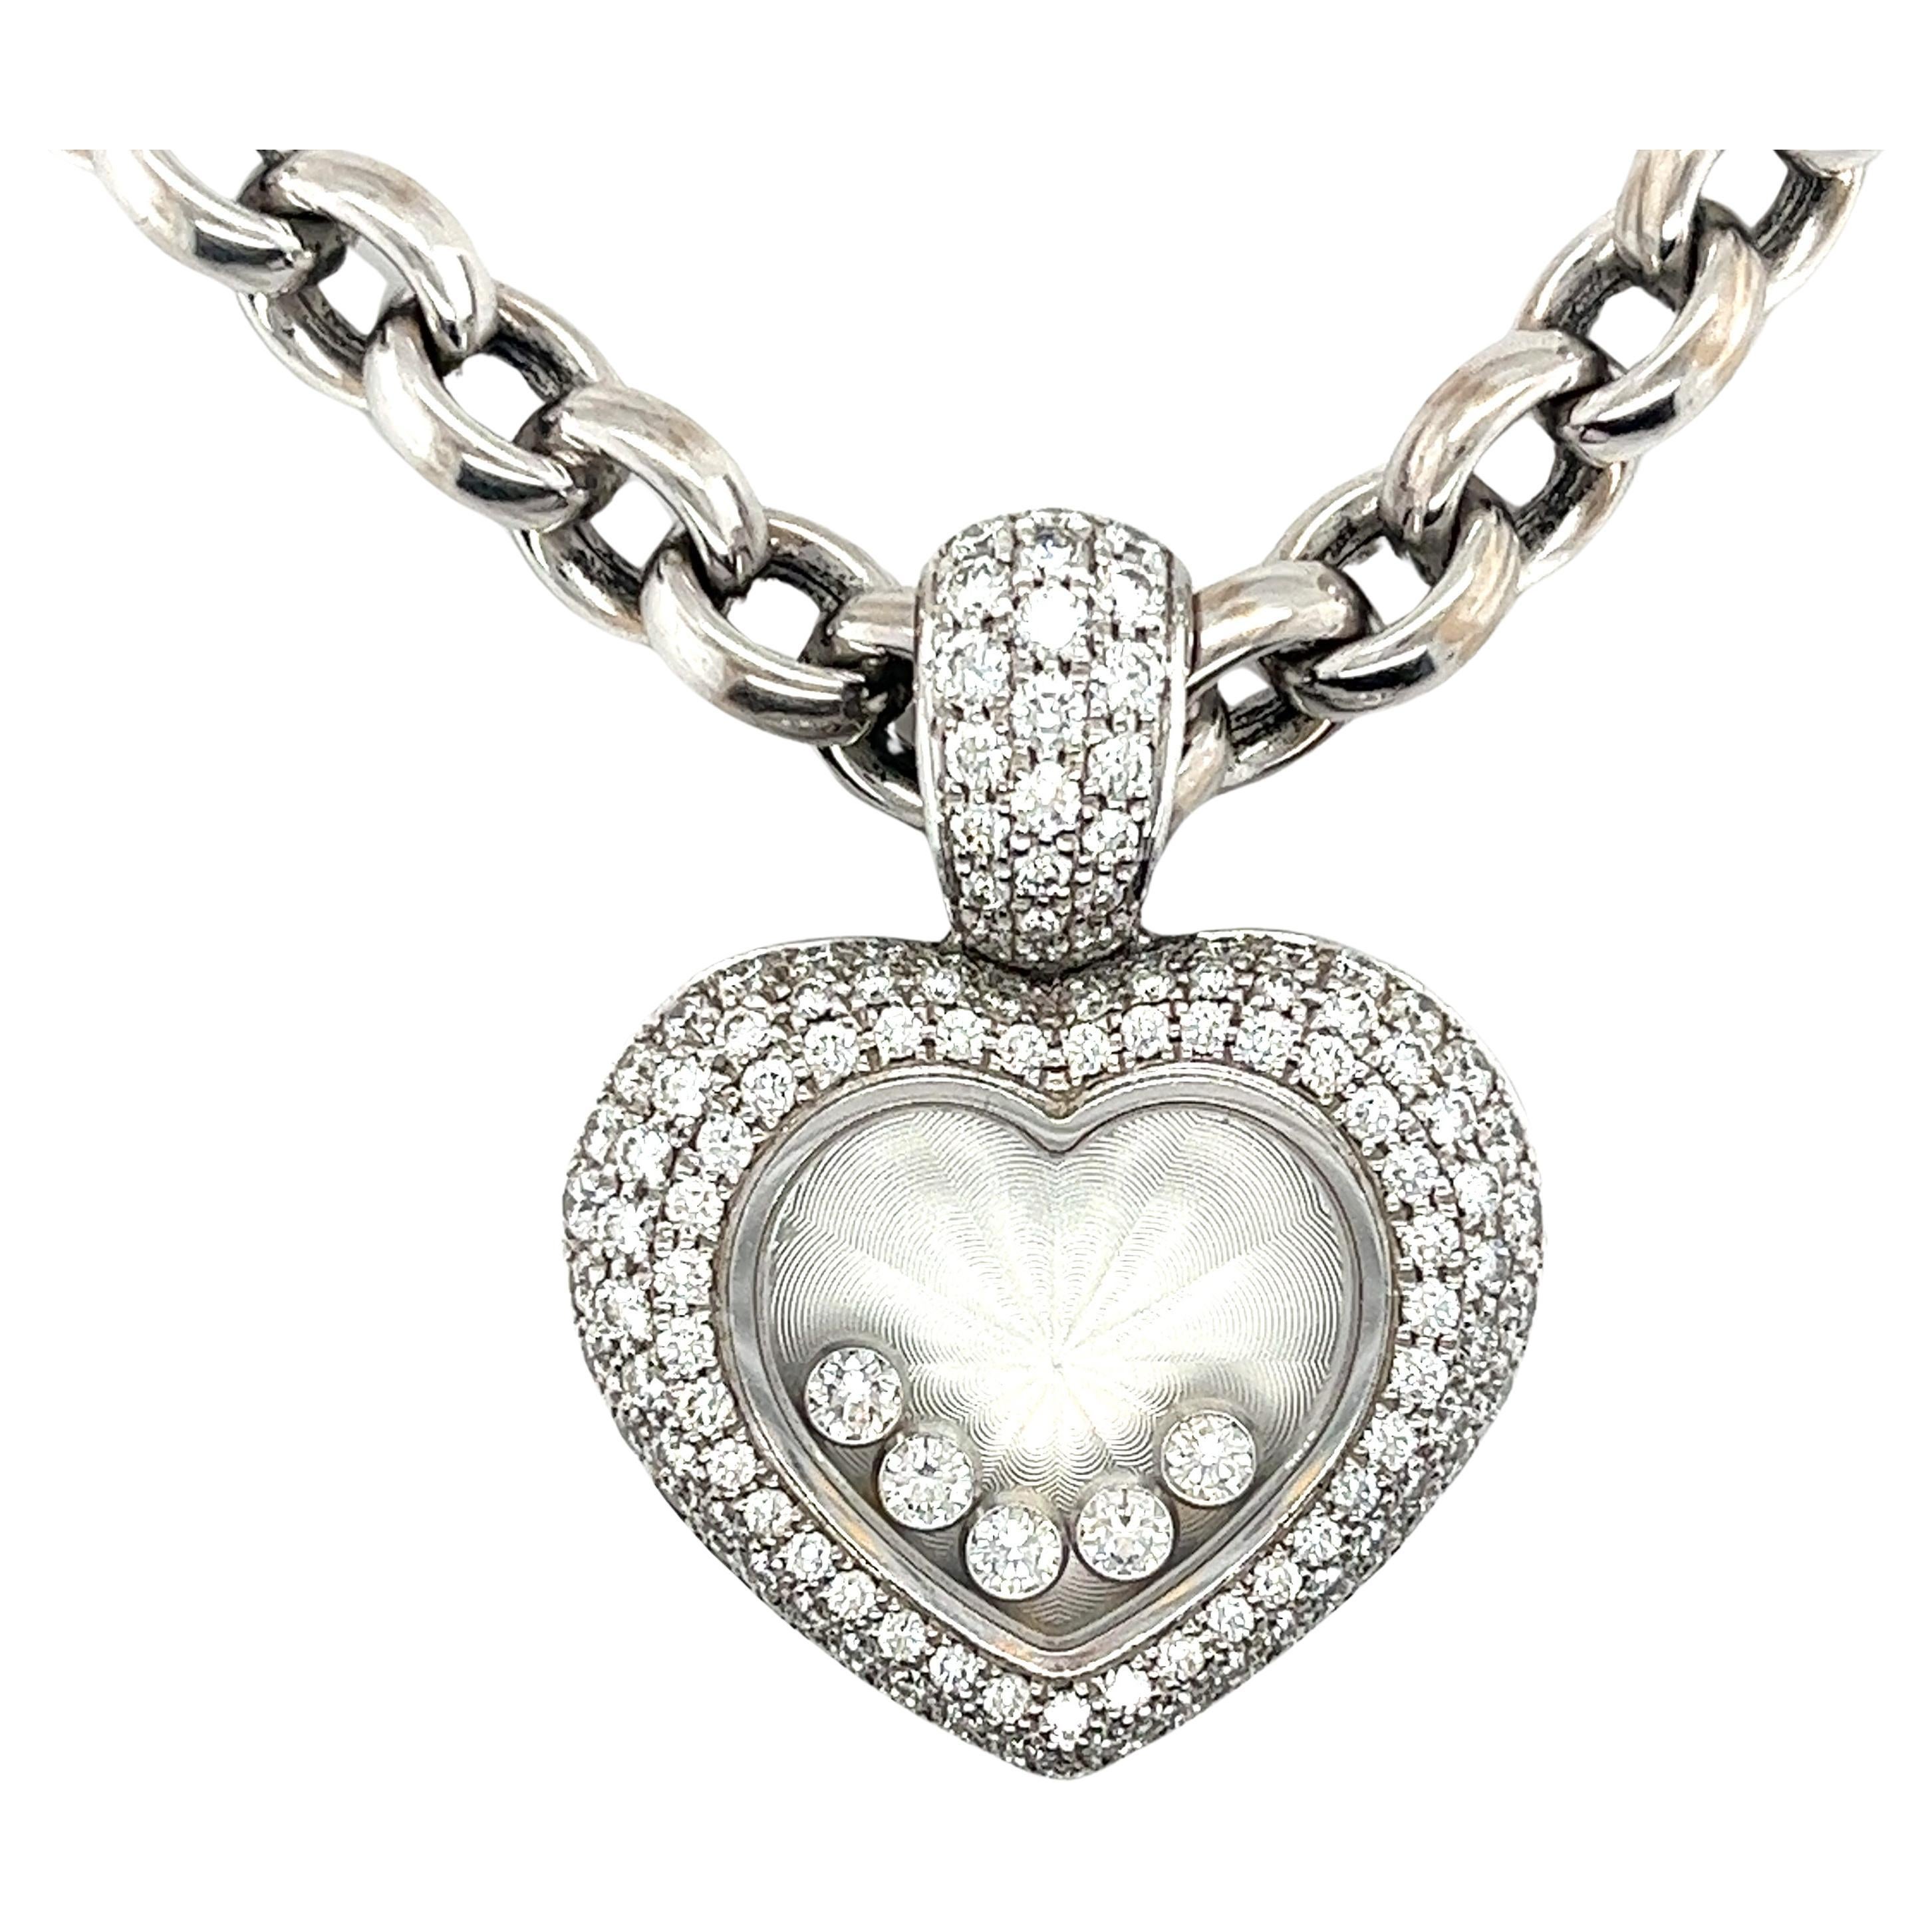 Chopard Happy Diamond floating diamond heart-shaped pendant necklace in 18k white gold. Complete with the original Chopard pouch and receipt papers. 

This pendant necklace features 5 floating diamonds that dazzle and dance in the pendant as you